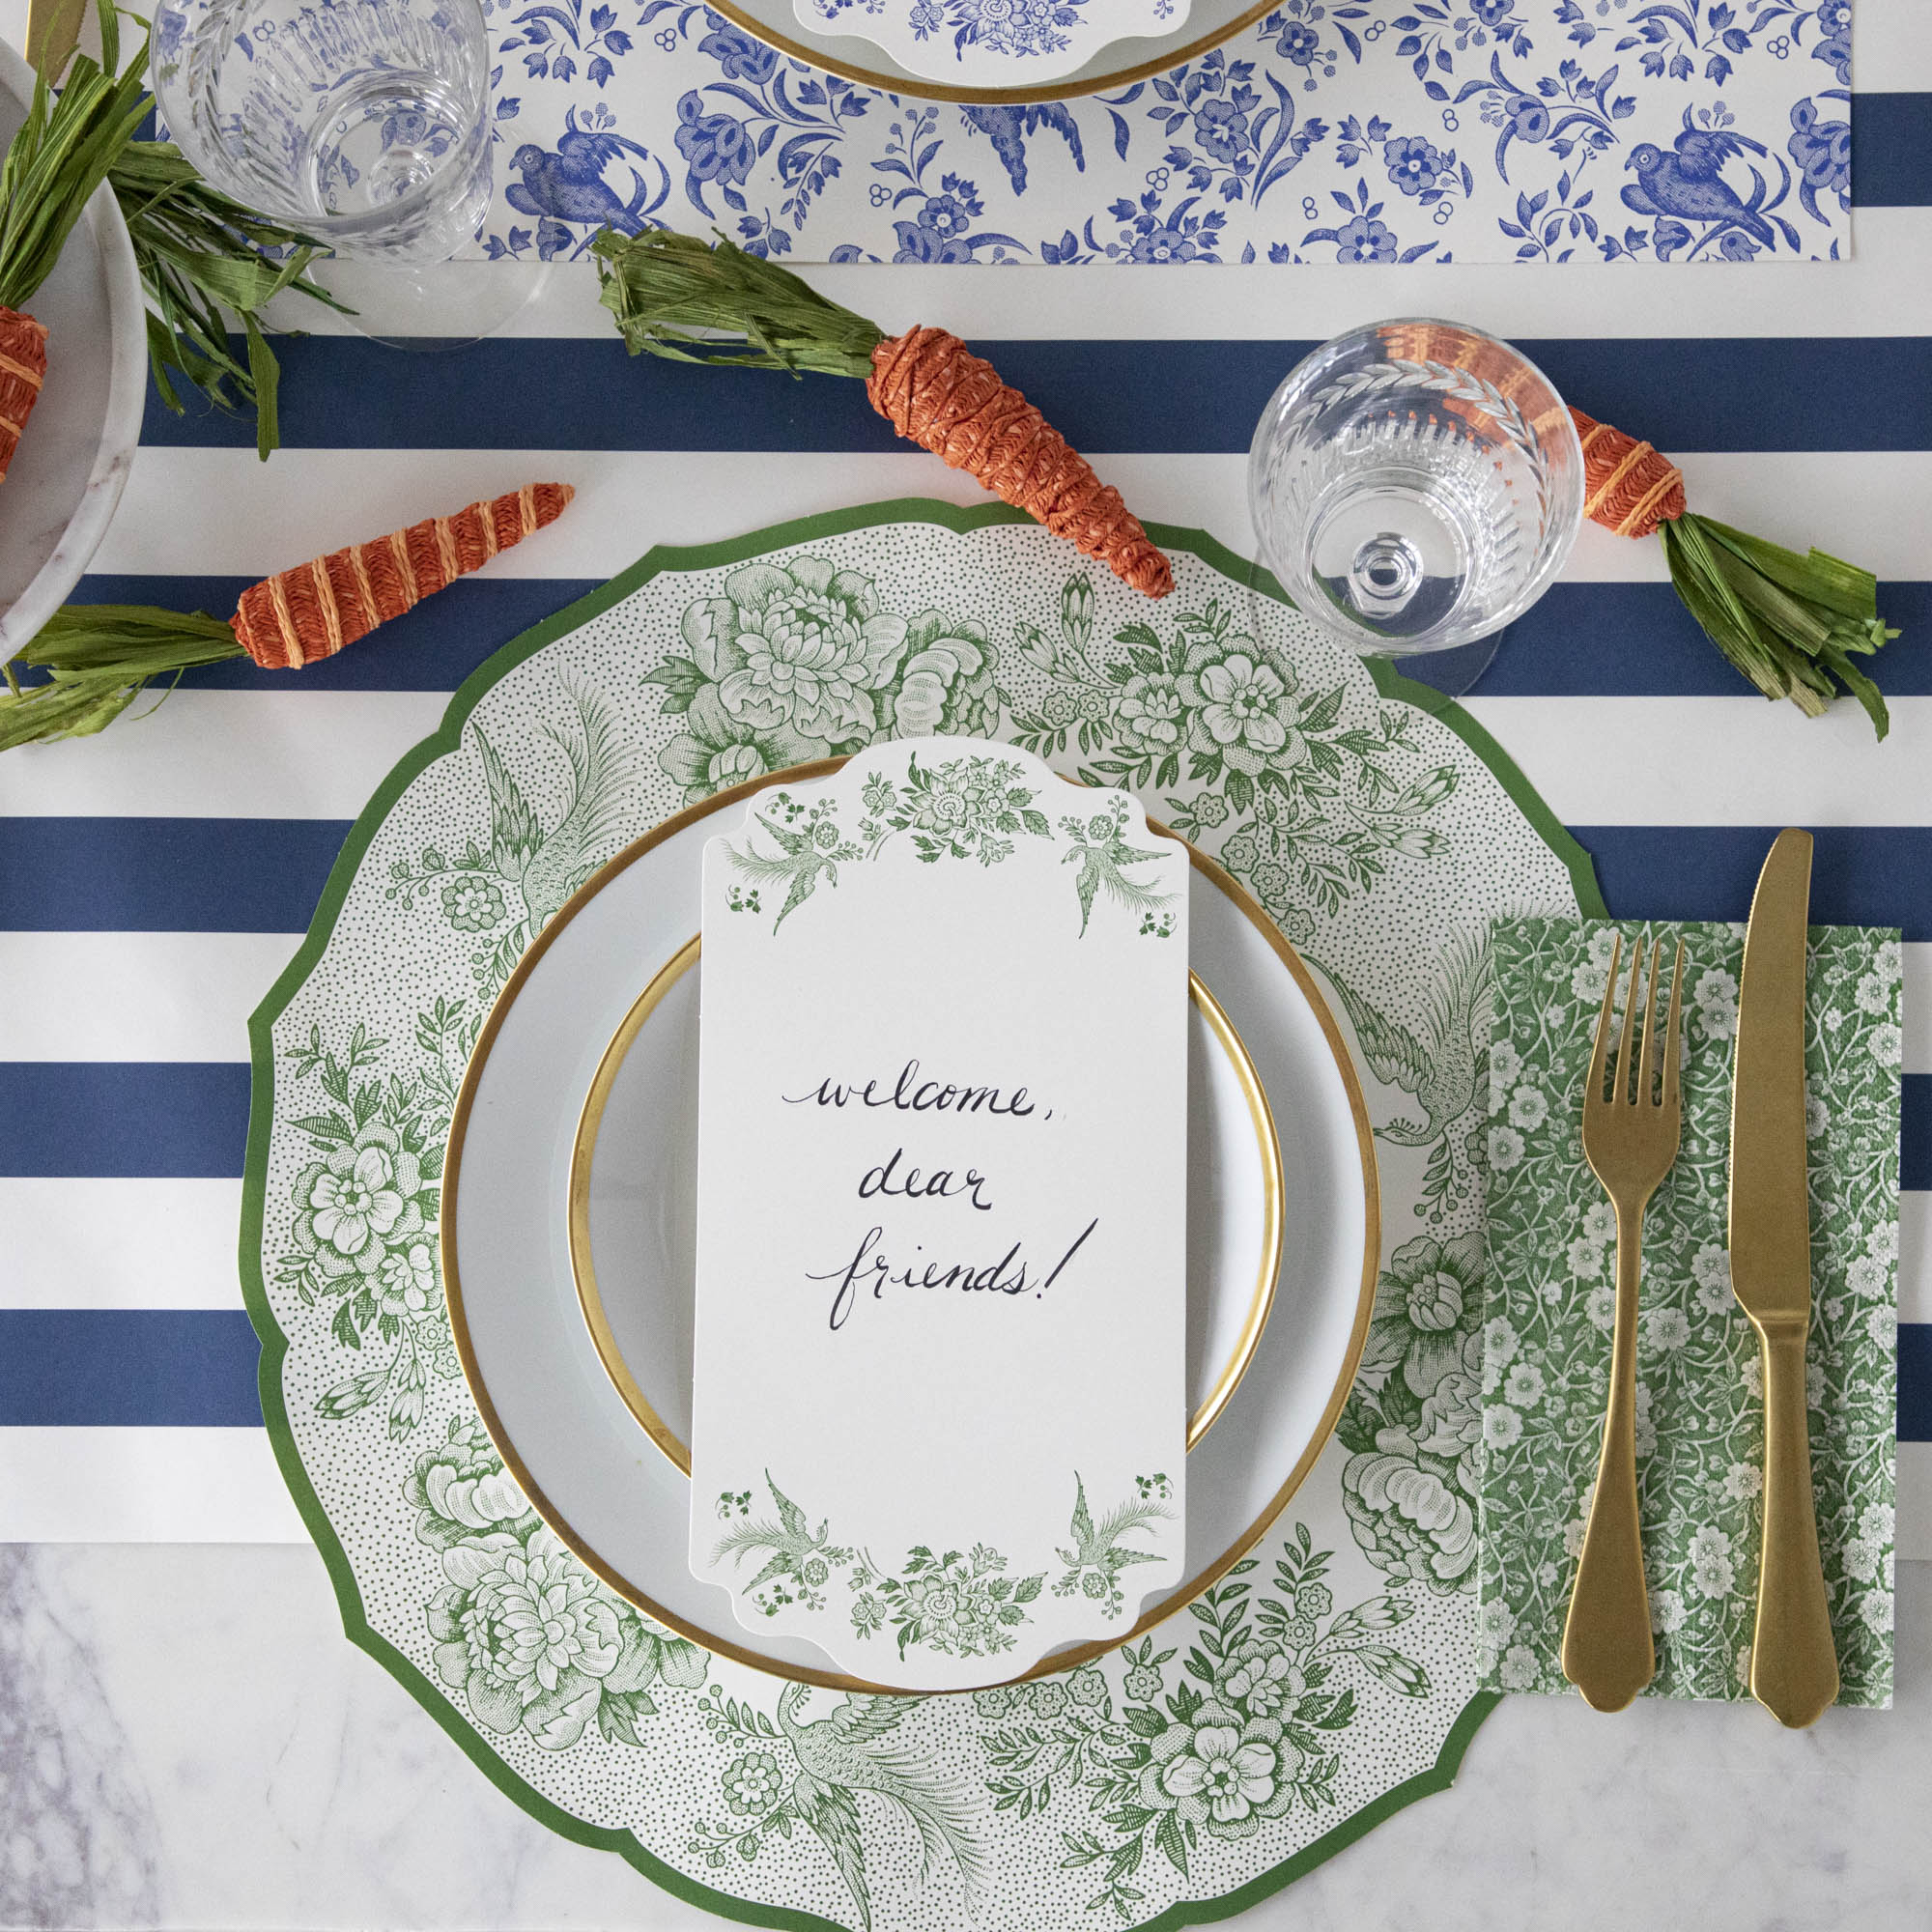 A Green Calico Guest Napkin under gold cutlery in an elegant place setting, from above.